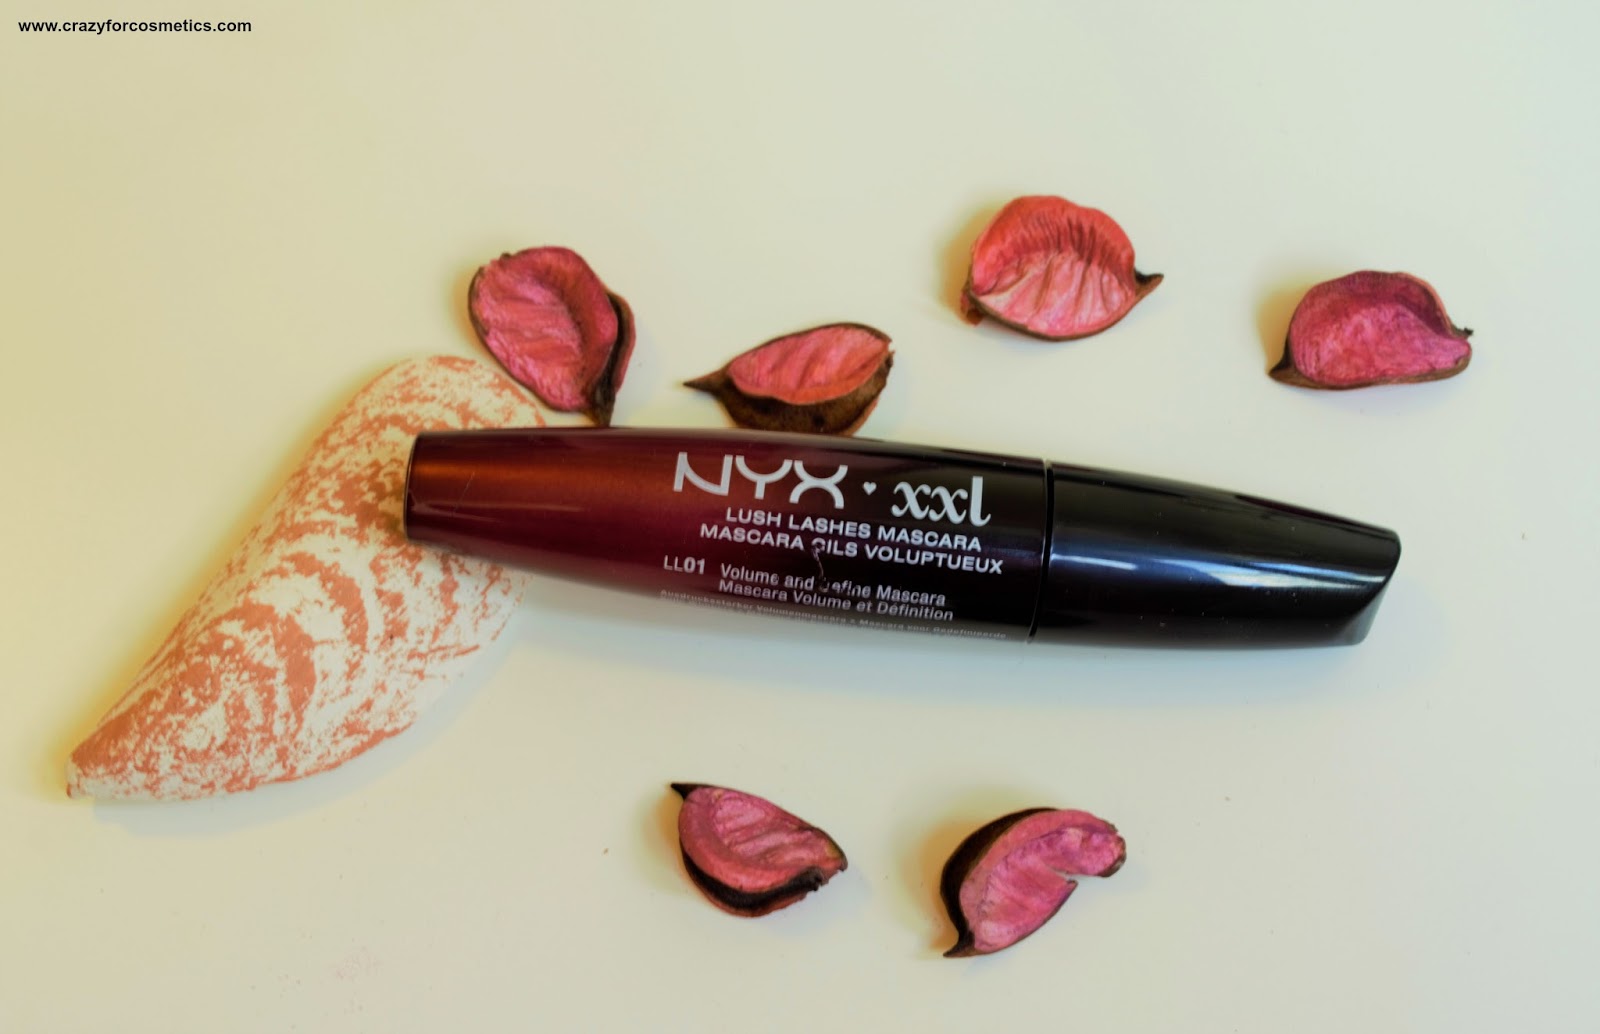 albue præst Elemental Crazy for Cosmetics- A Singapore based Beauty/ Lifestyle blog about  Makeup,Lifestyle and Shopping: NYX XXL Lush Lashes Mascara Review